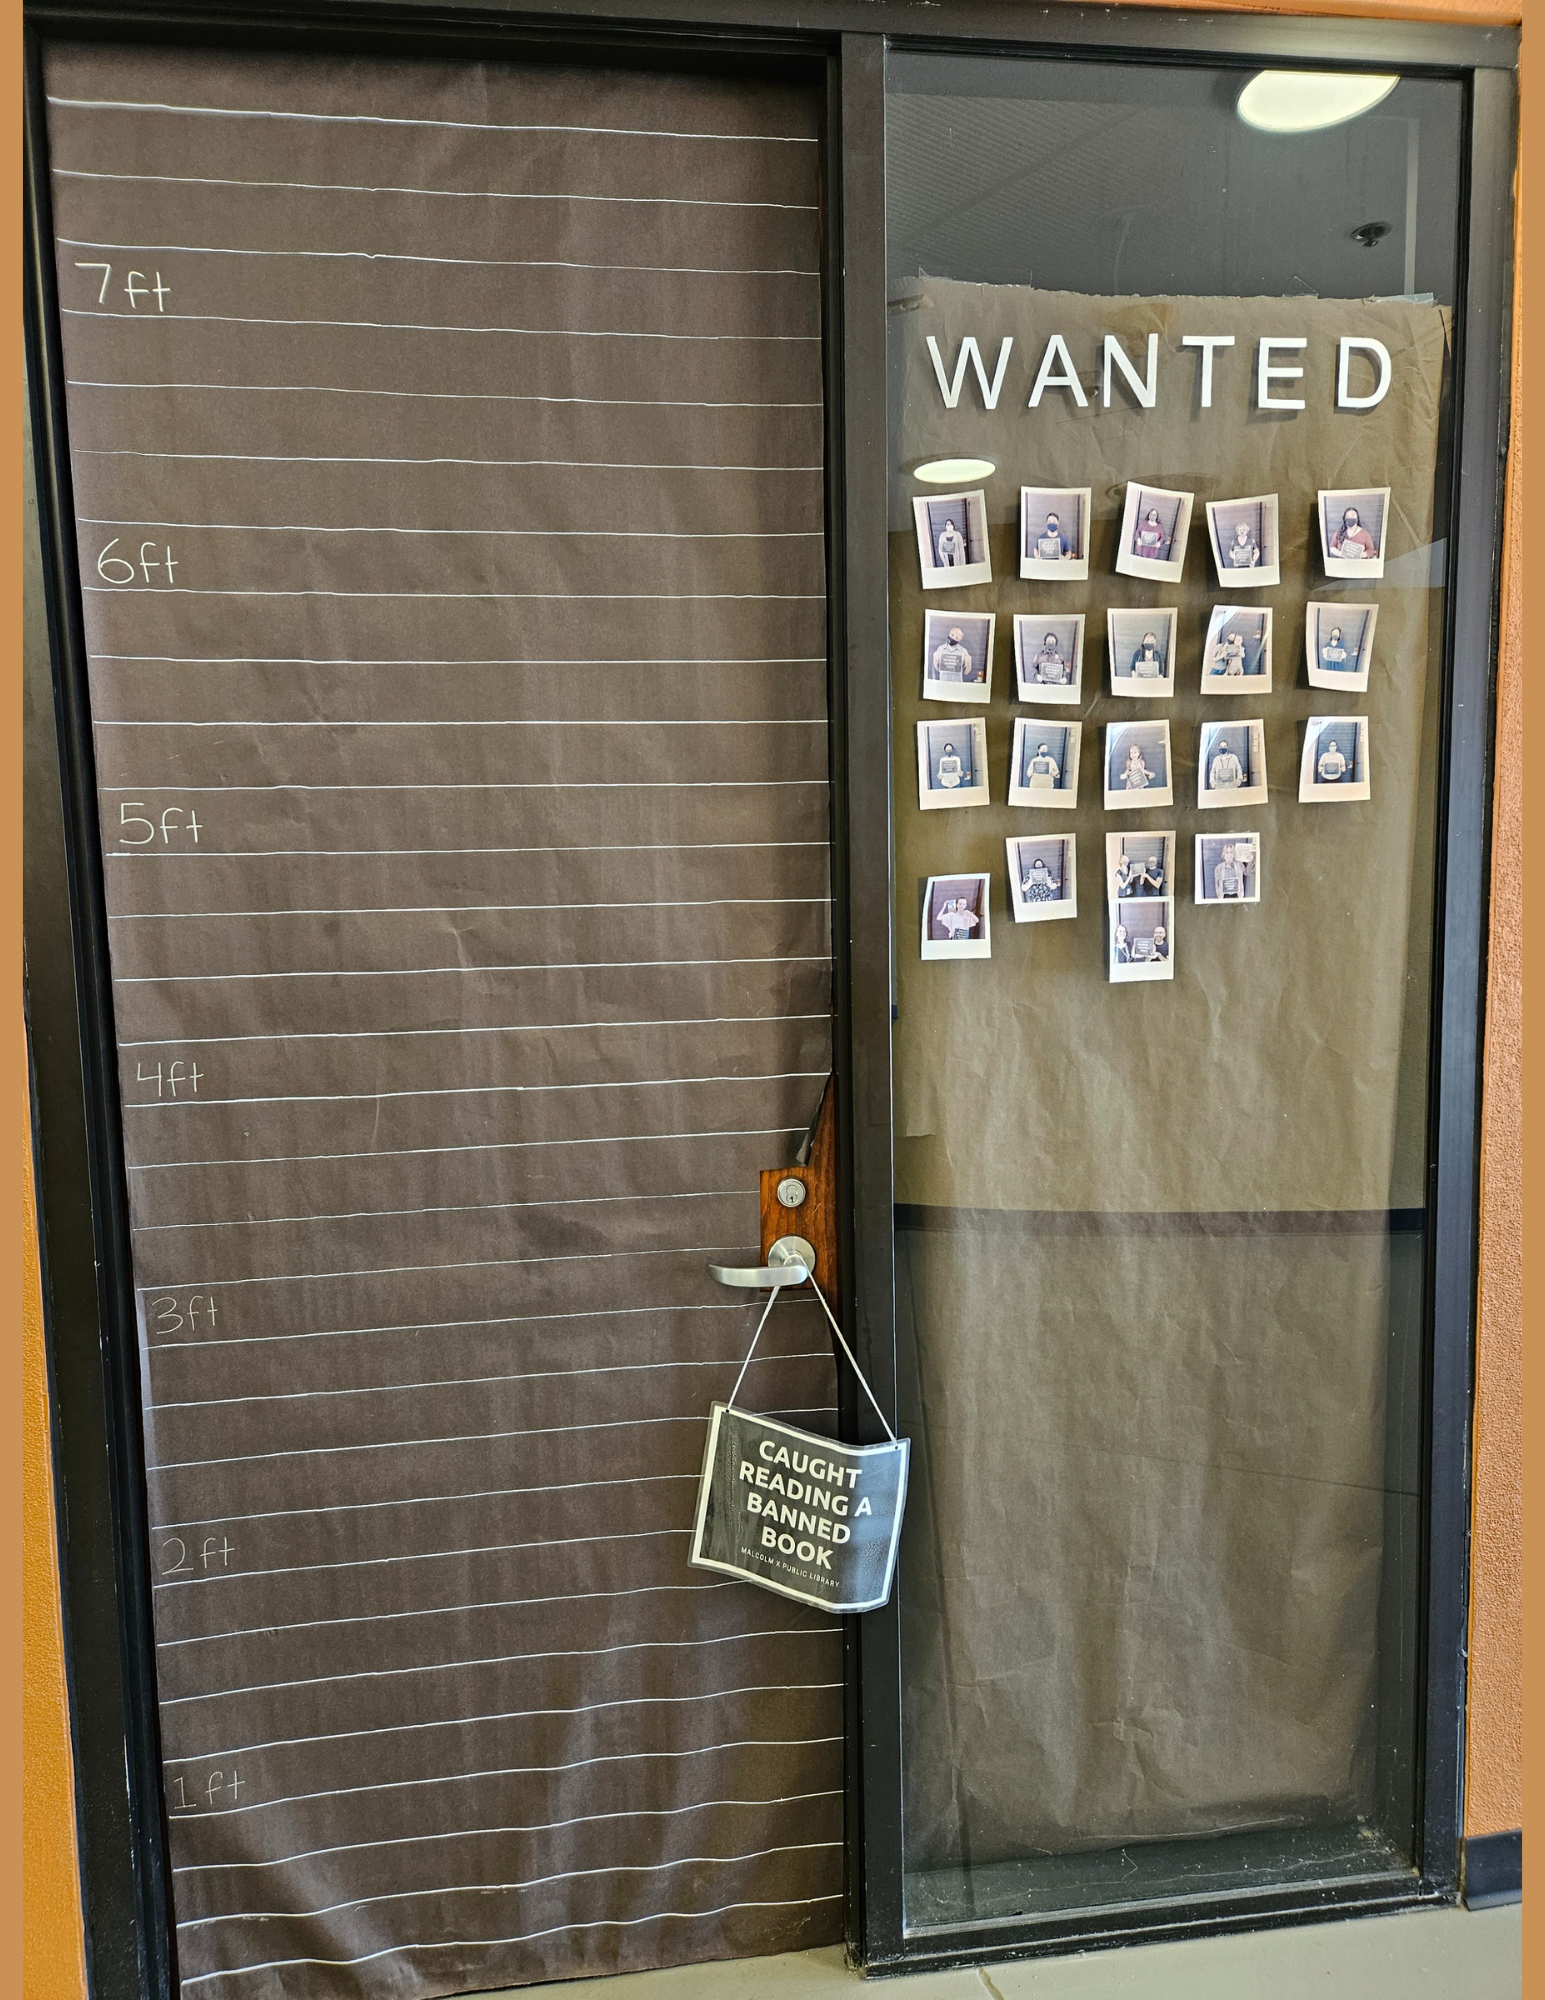 A photograph of the Banned Books Week Wanted Wall. A door is covered in black paper with white lines with numbers on the left side. A sign stating "caught reading a banned book" is hanging from the doorknob. The window to the right of the door says "wanted" and displays photos of people in front of the door.